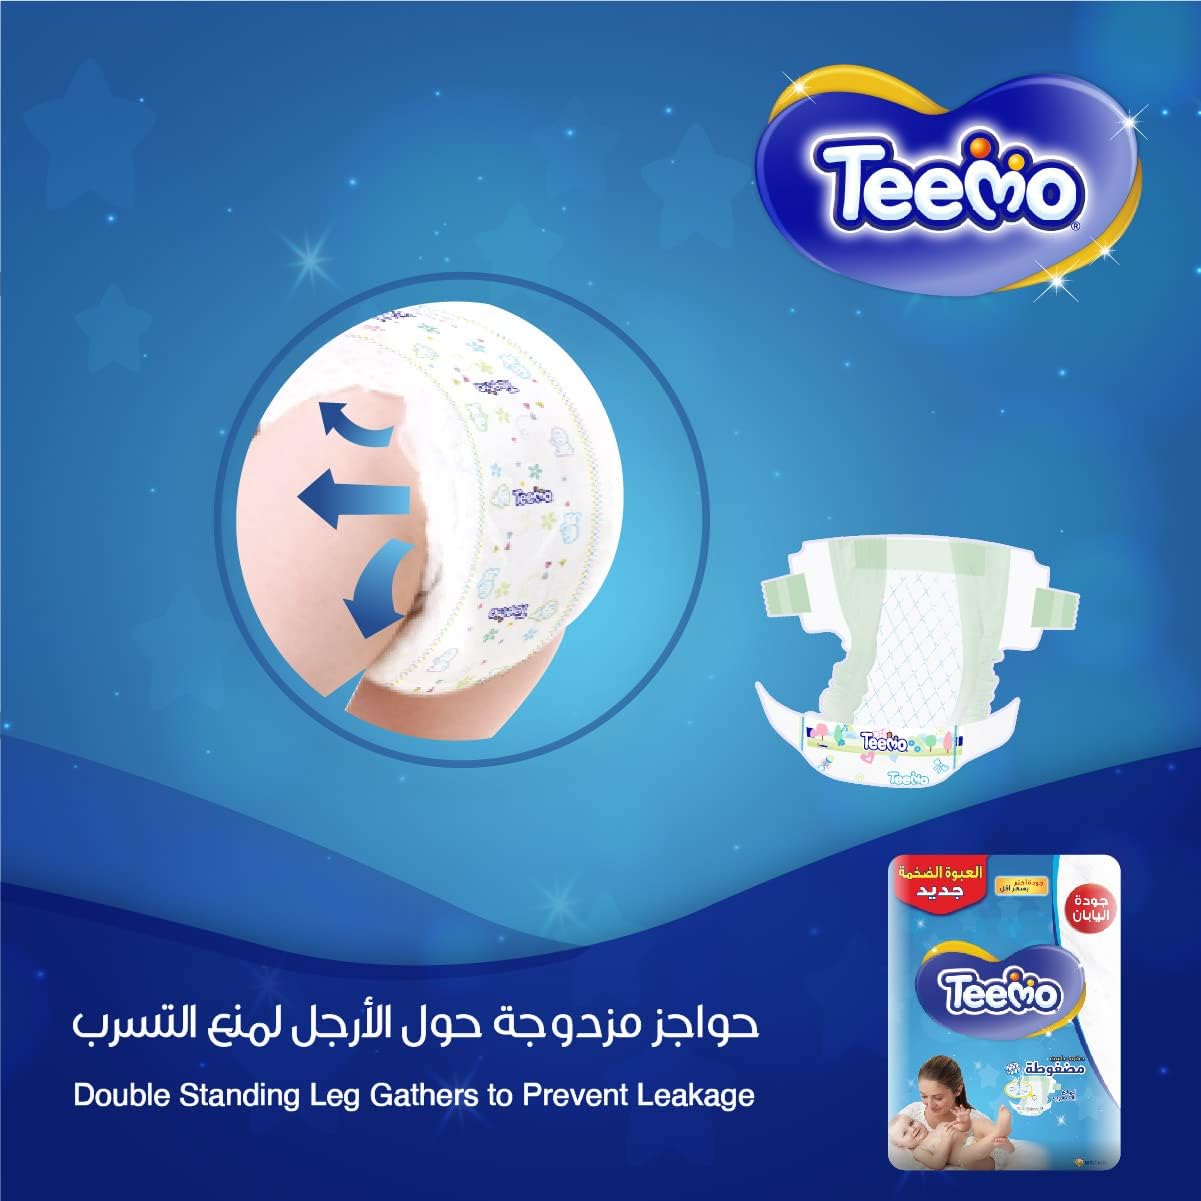 Teemo Baby Diapers, Size 2, Small, 3.5-7 kg, Mega Box